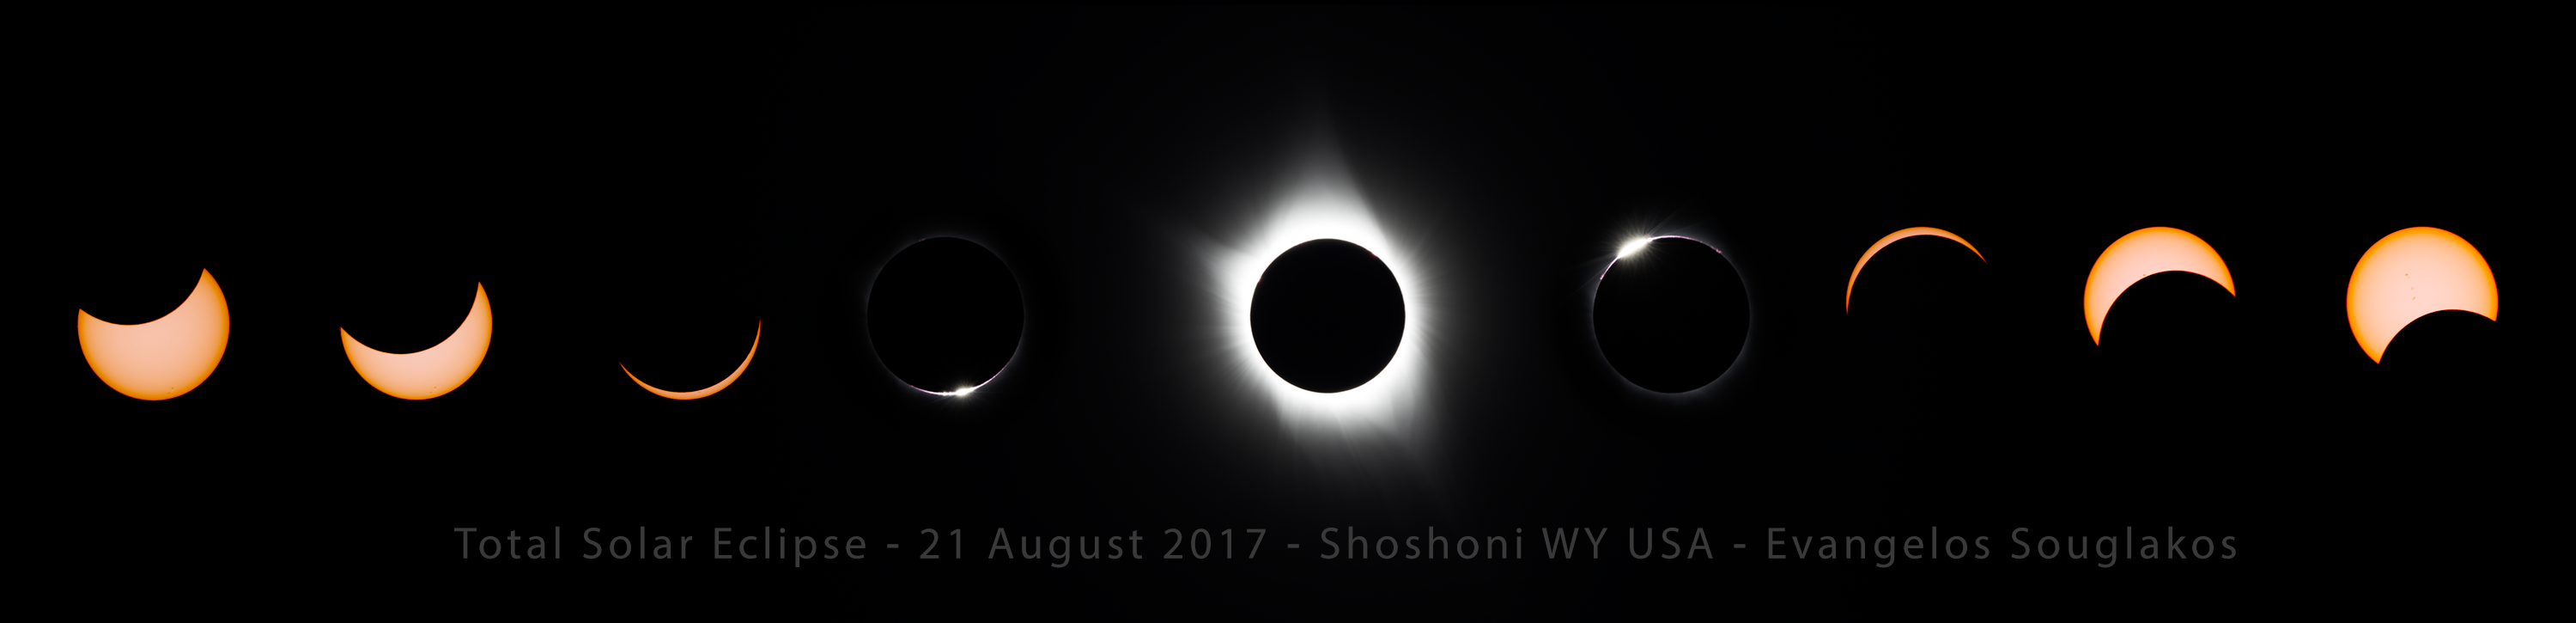 The Great American Total Solar Eclipse Of Aug 21, 2017 In All Phases